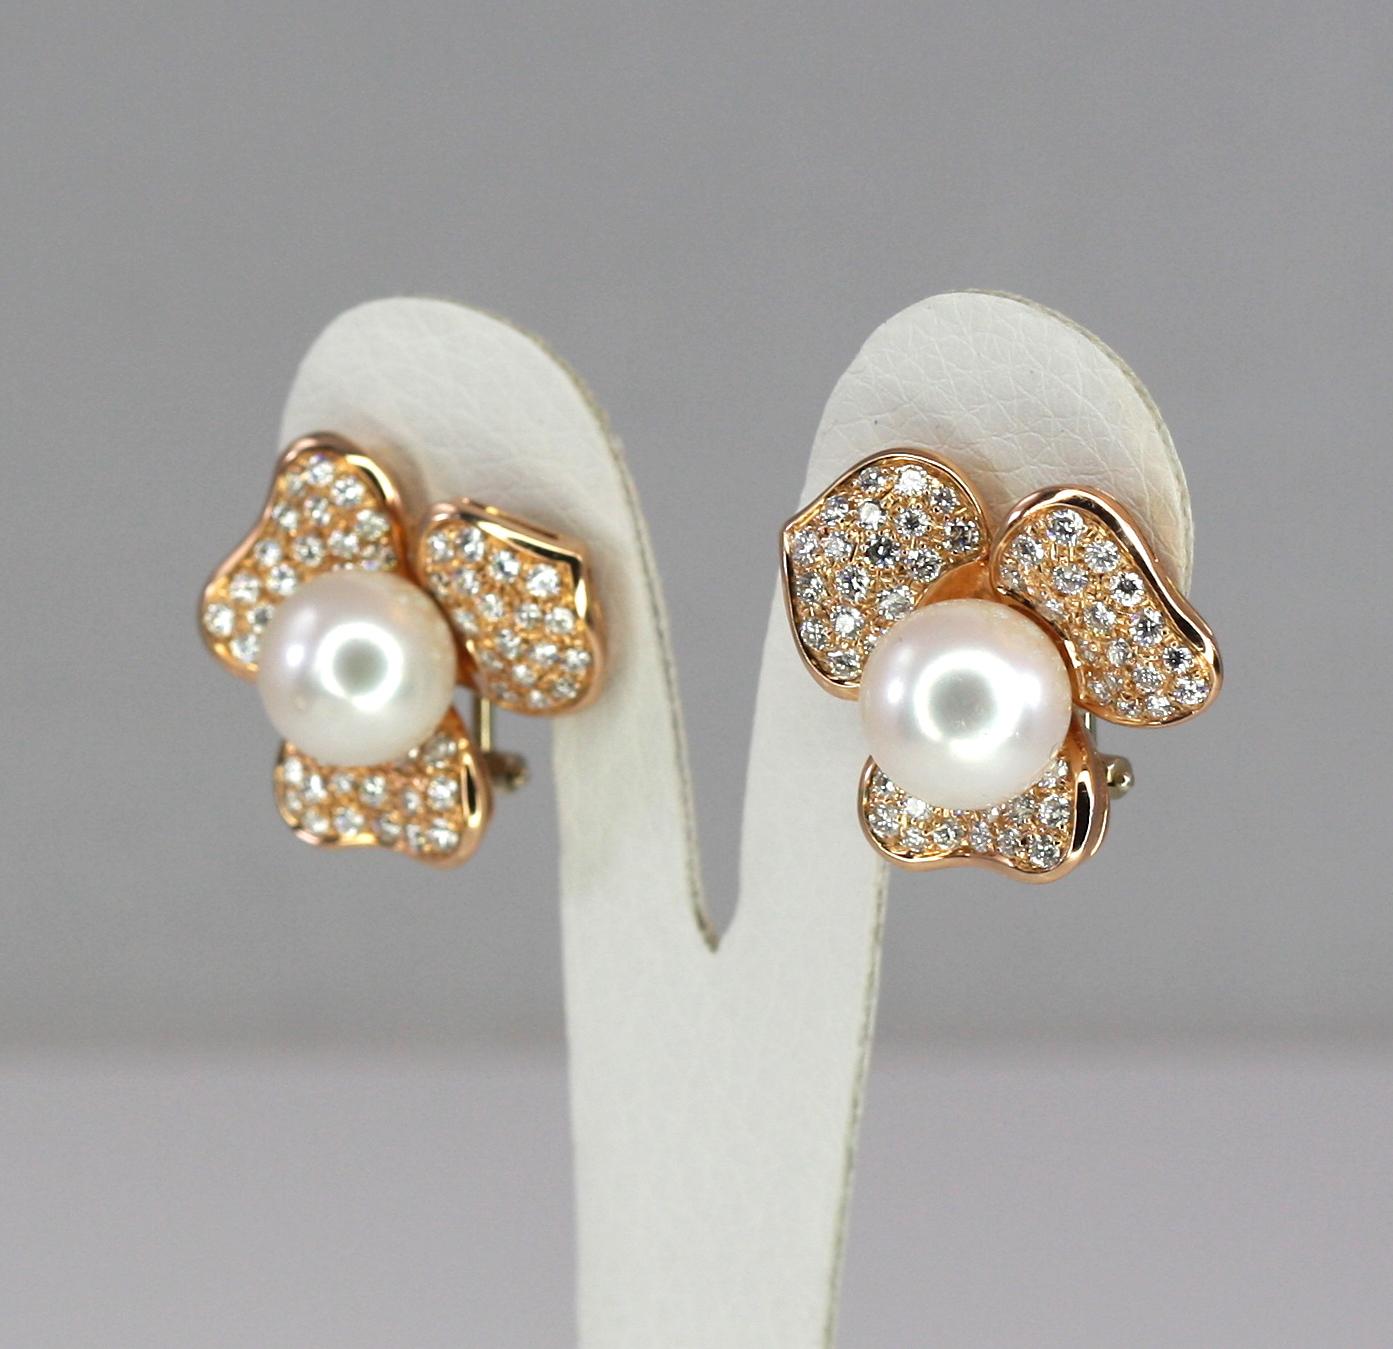 S.Georgios designer earrings custom made Rose gold 18 Karat. This stunning pair features a triple-A South Sea white Pearl 11.0mm in the center and brilliant-cut white diamonds total weight of 2,24 Carat around forming a flower. They are made to be